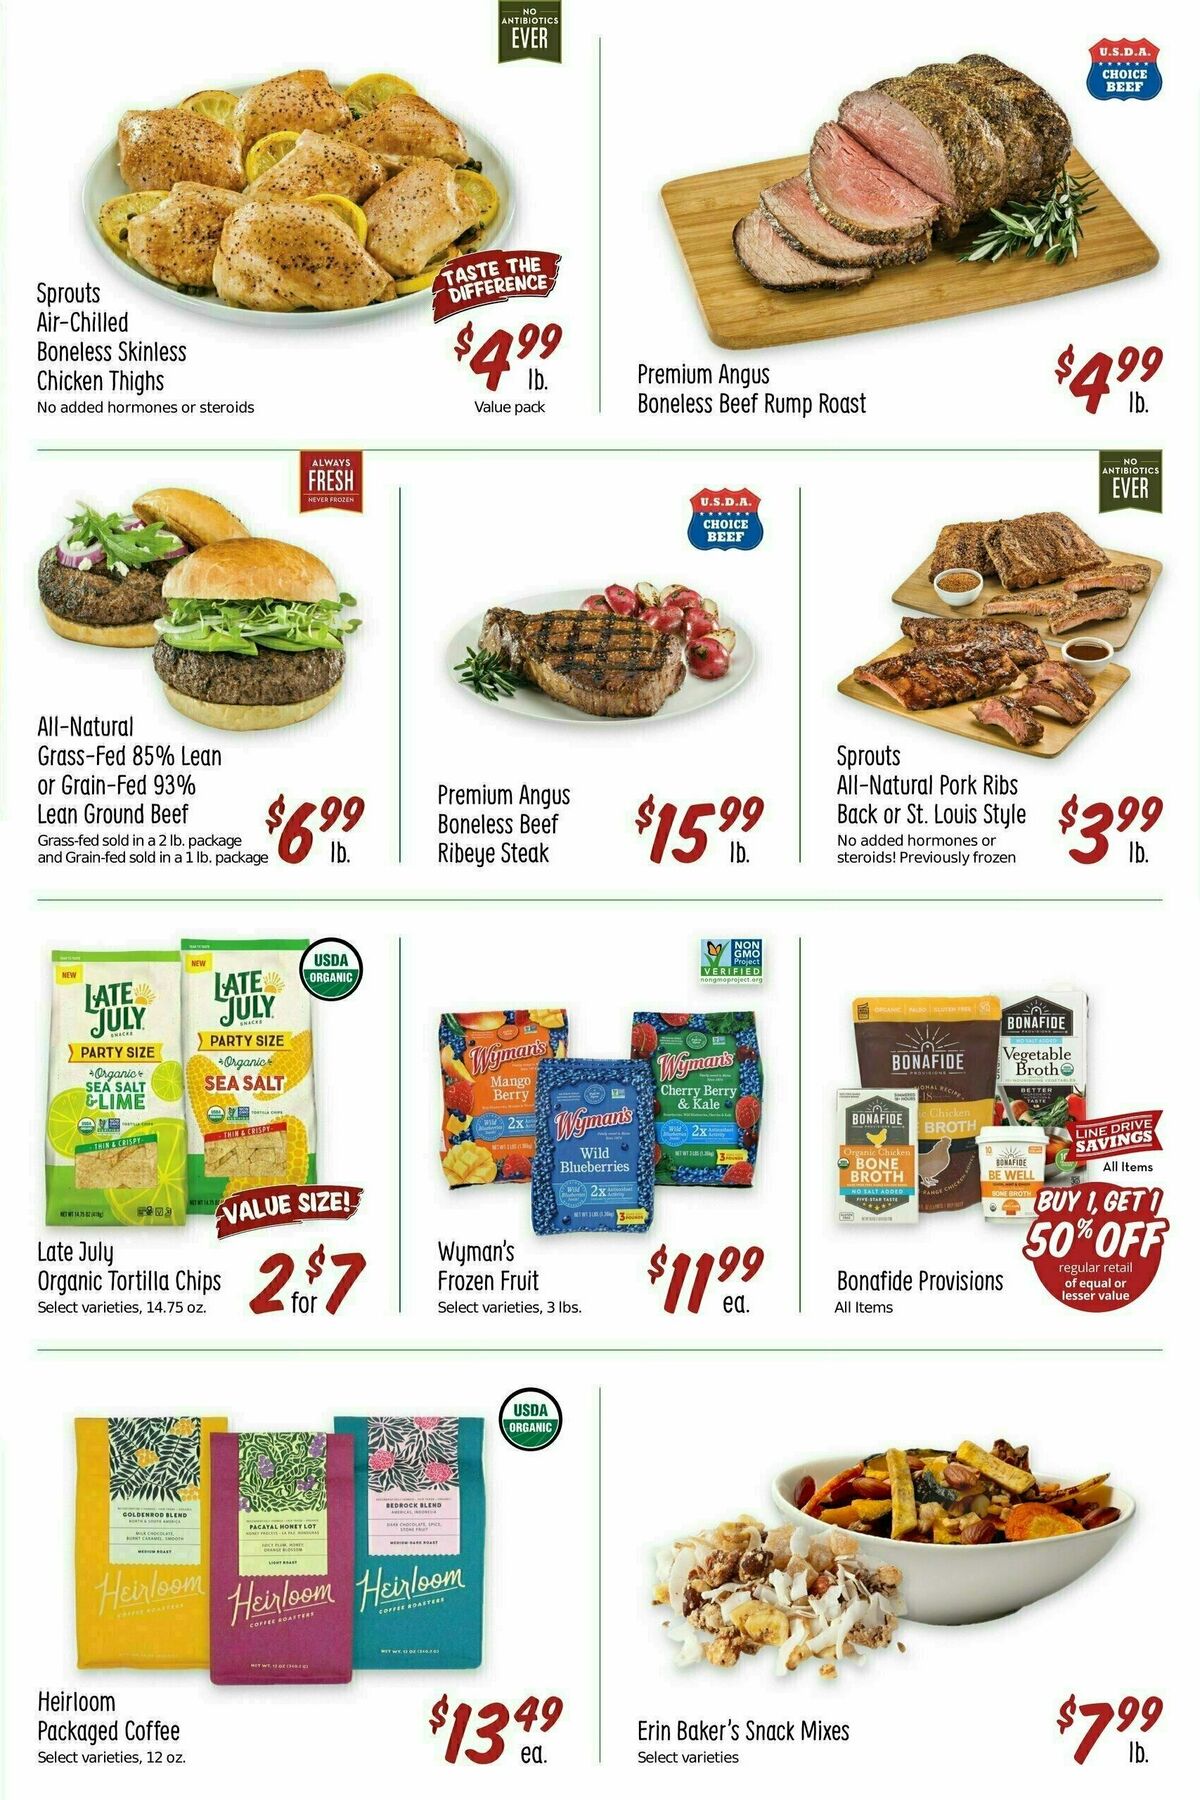 Sprouts Farmers Market Weekly Ad from January 3